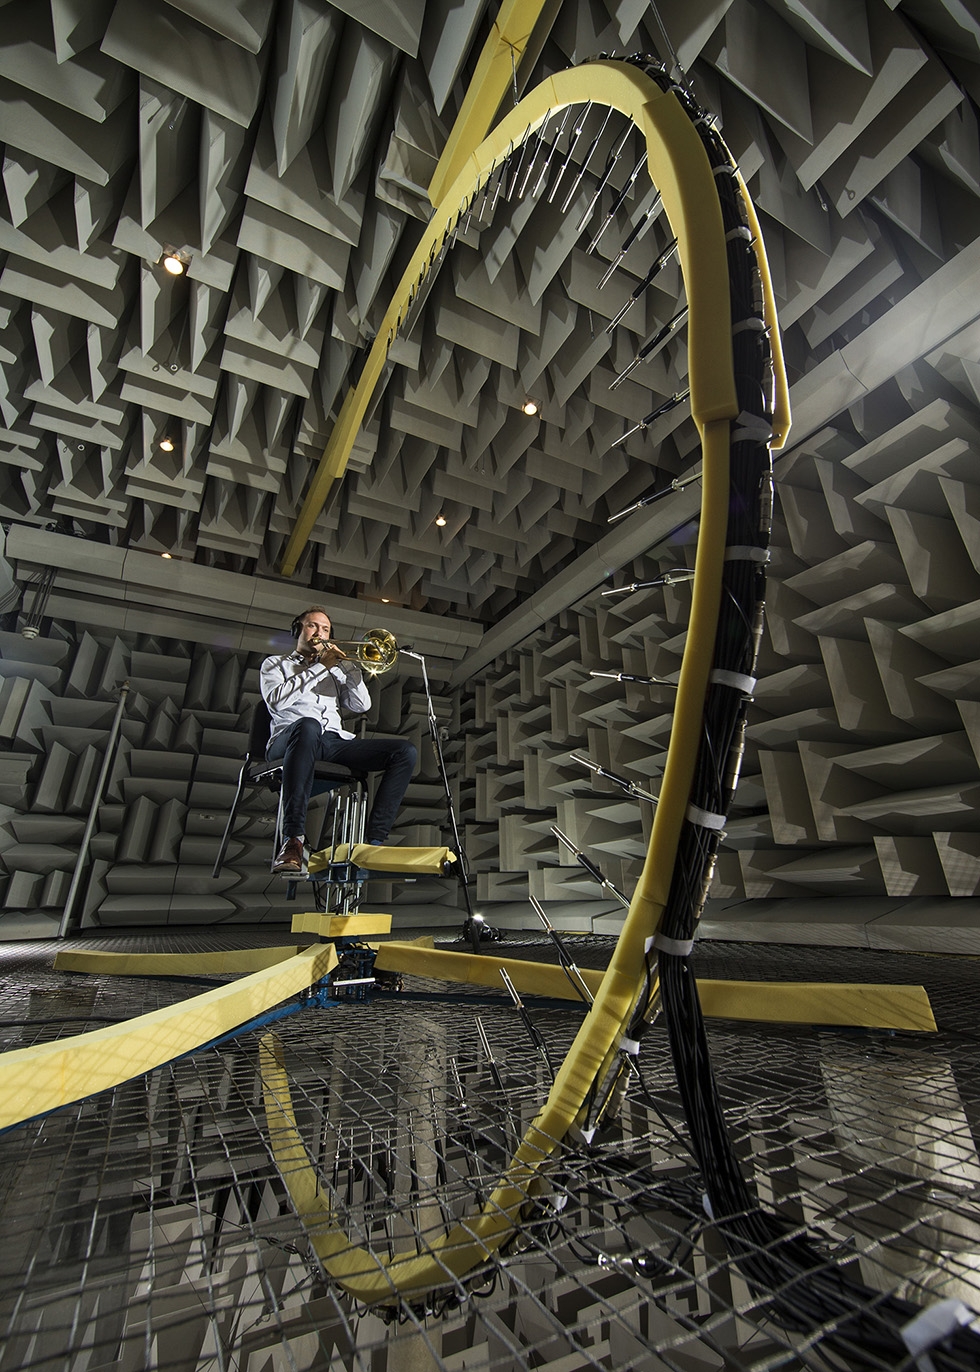 1407-08 230.CR2 Acoustic Research–Large Anechoic Chamber. Physical and Mathematical Sciences College, Physic and Astronomy Department. Tim Leishman Testing notes from a Trombone played by Marcus Anderson July 8, 2014 Photo by Mark A. Philbrick Copyright BYU Photo 2014 All Rights Reserved photo@byu.edu (801)422-7322